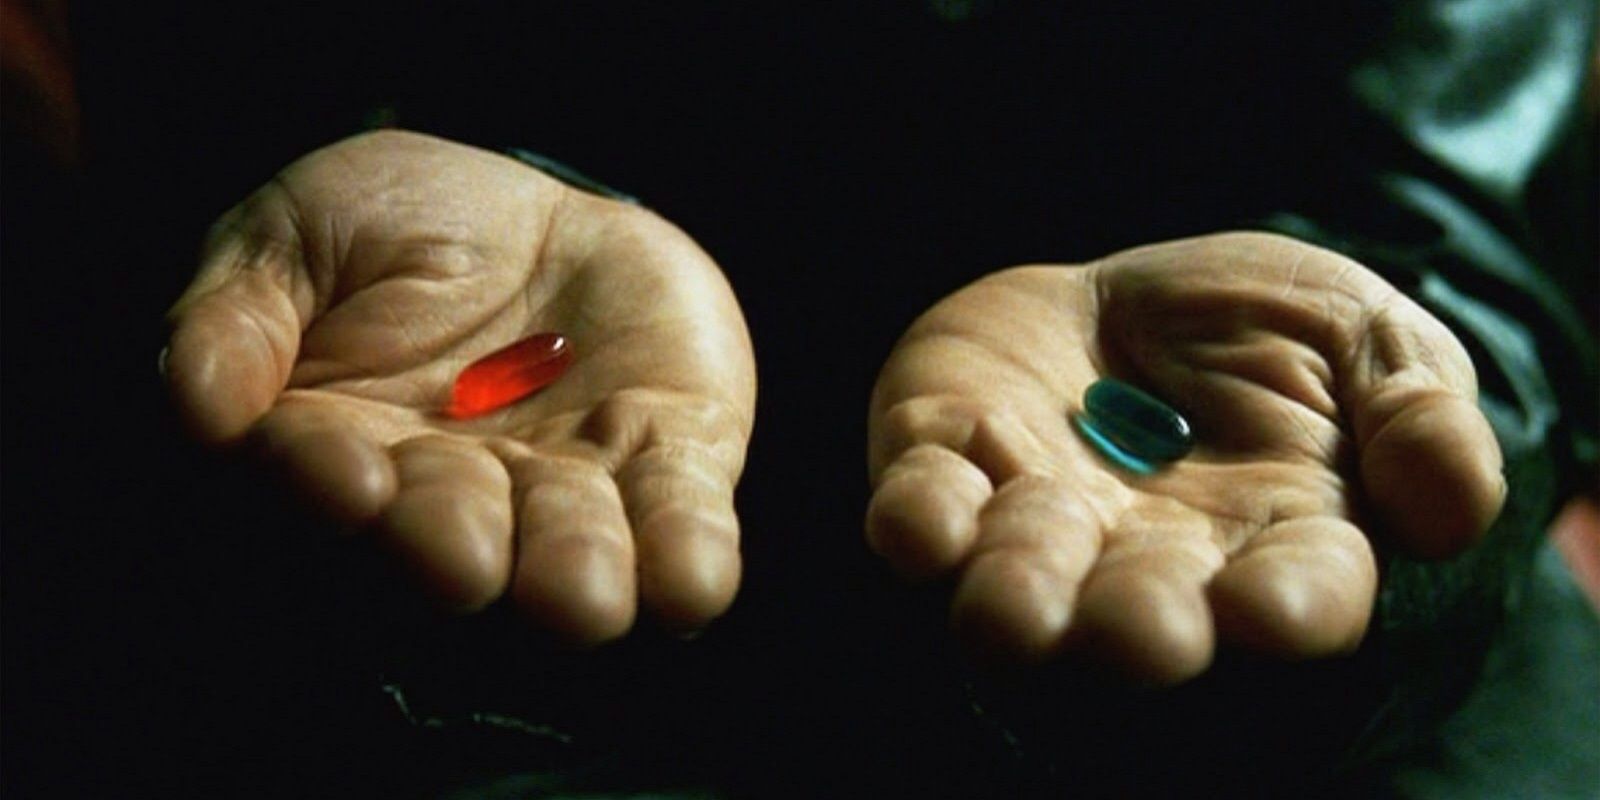 Morpheus holding out the red and blue pills in The Matrix.